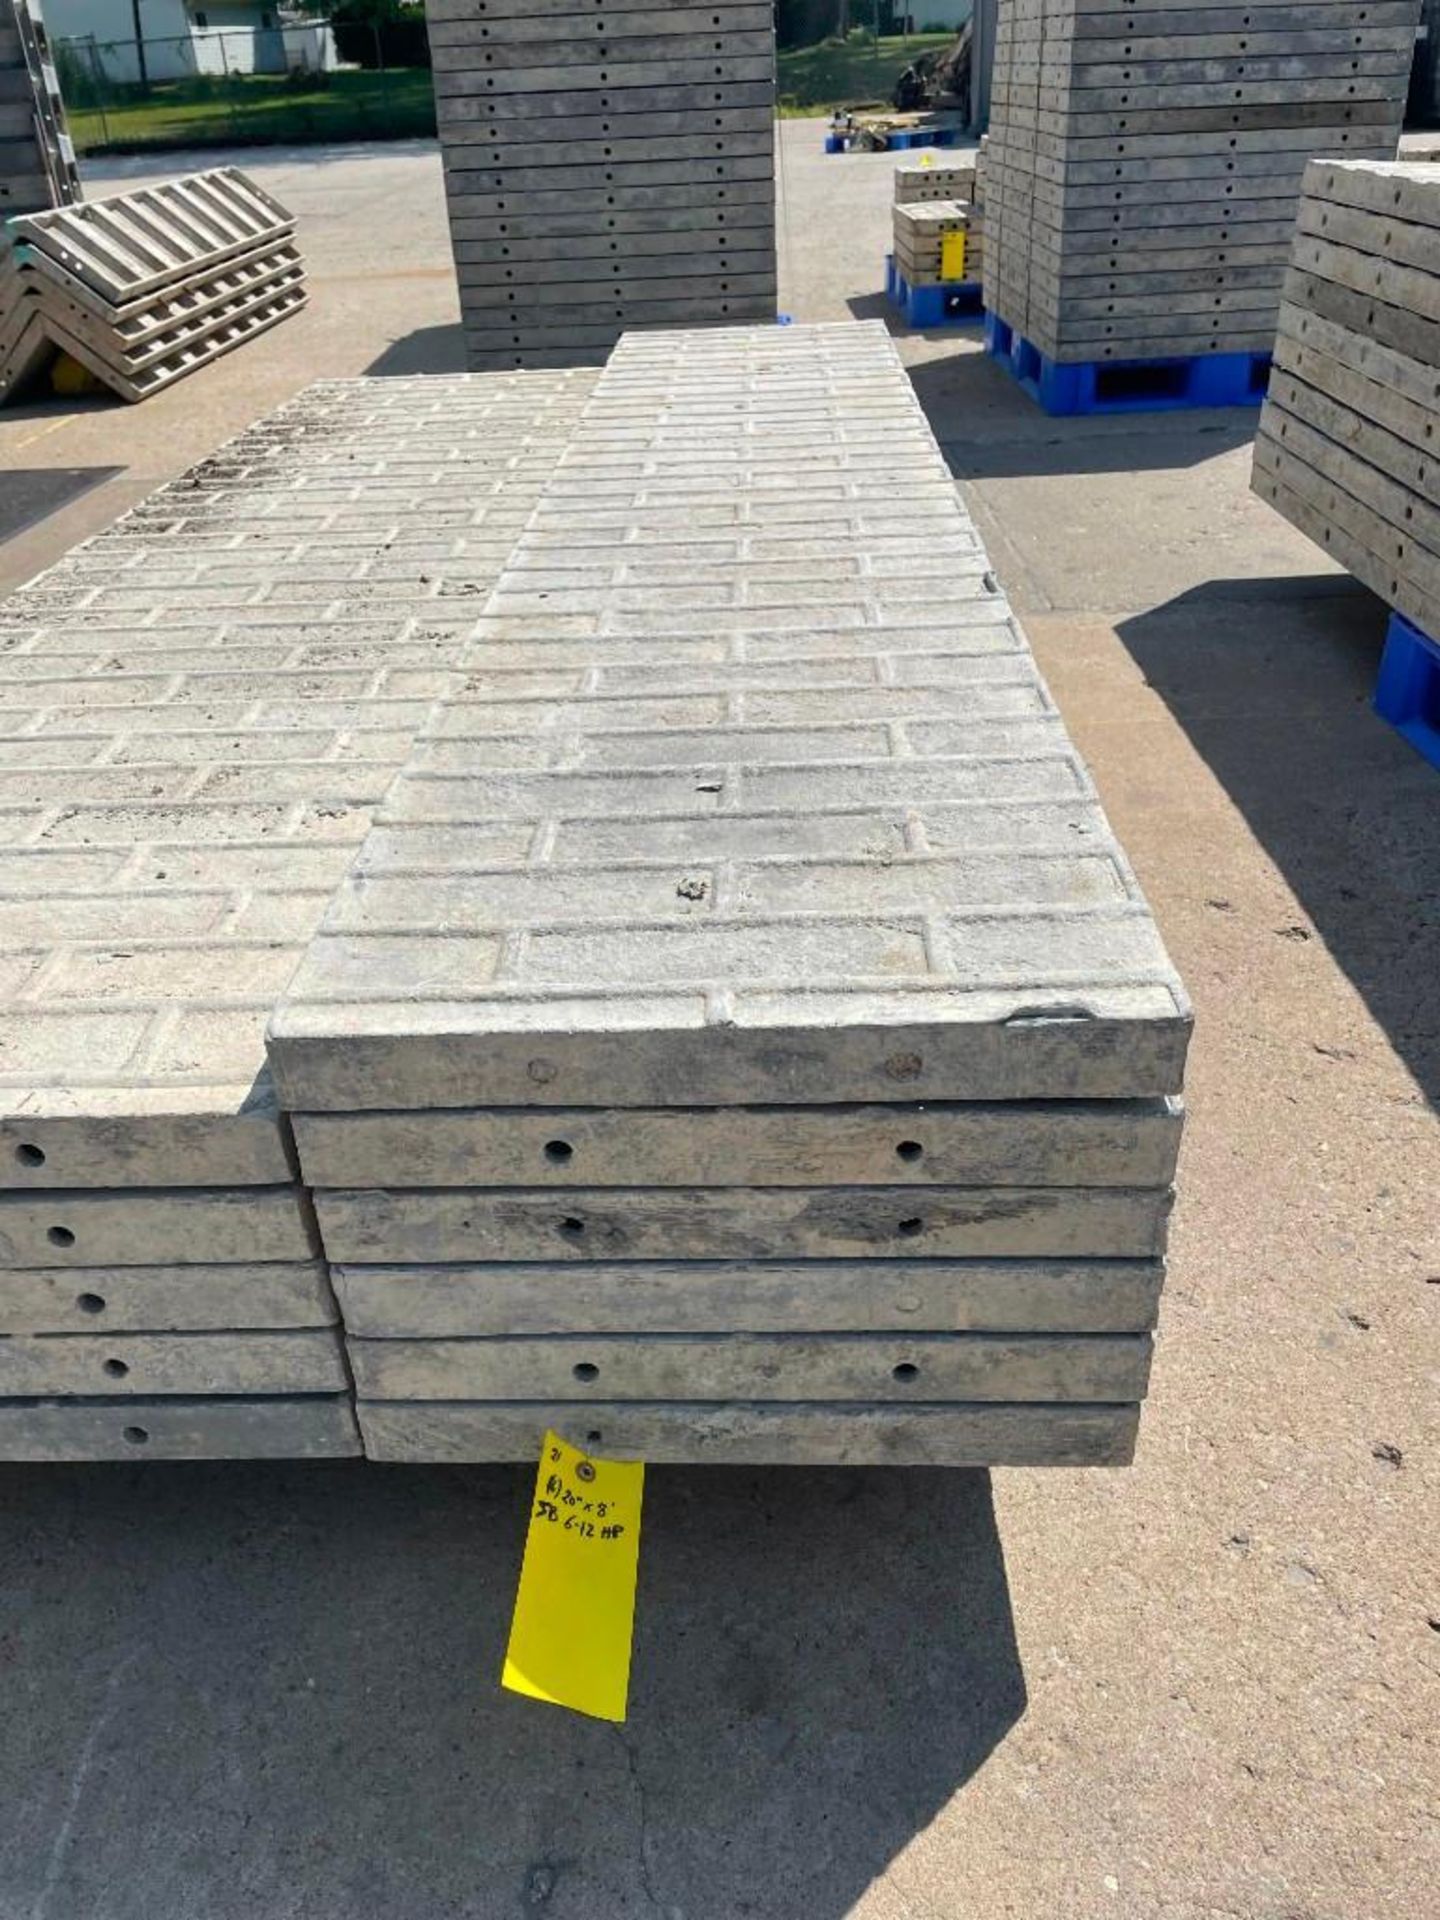 (6) 20" x 8' Symons Smooth Brick Aluminum Concrete Forms 6-12 Hole Pattern. Located in Mt. Pleasant,